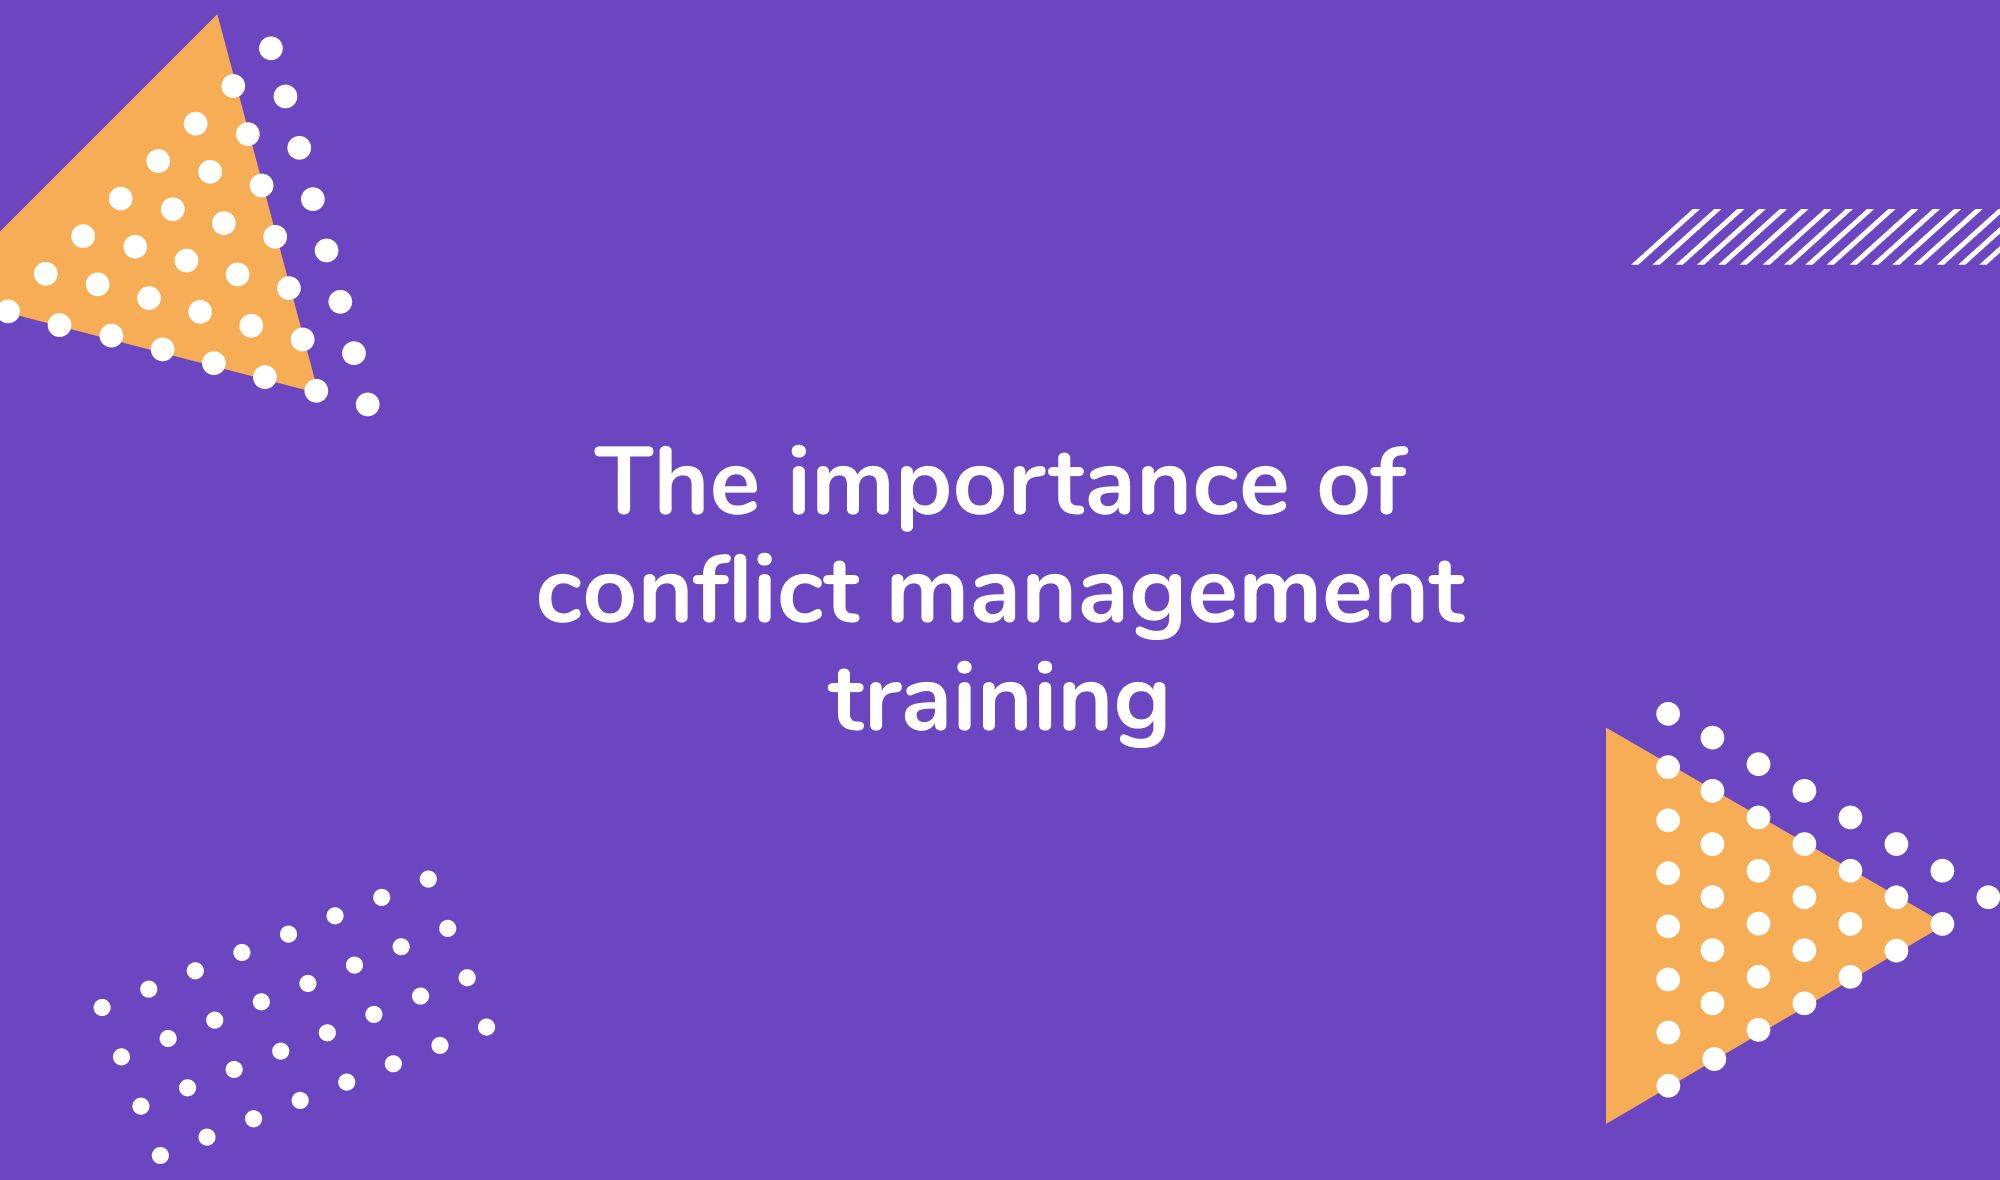 The importance of conflict management training